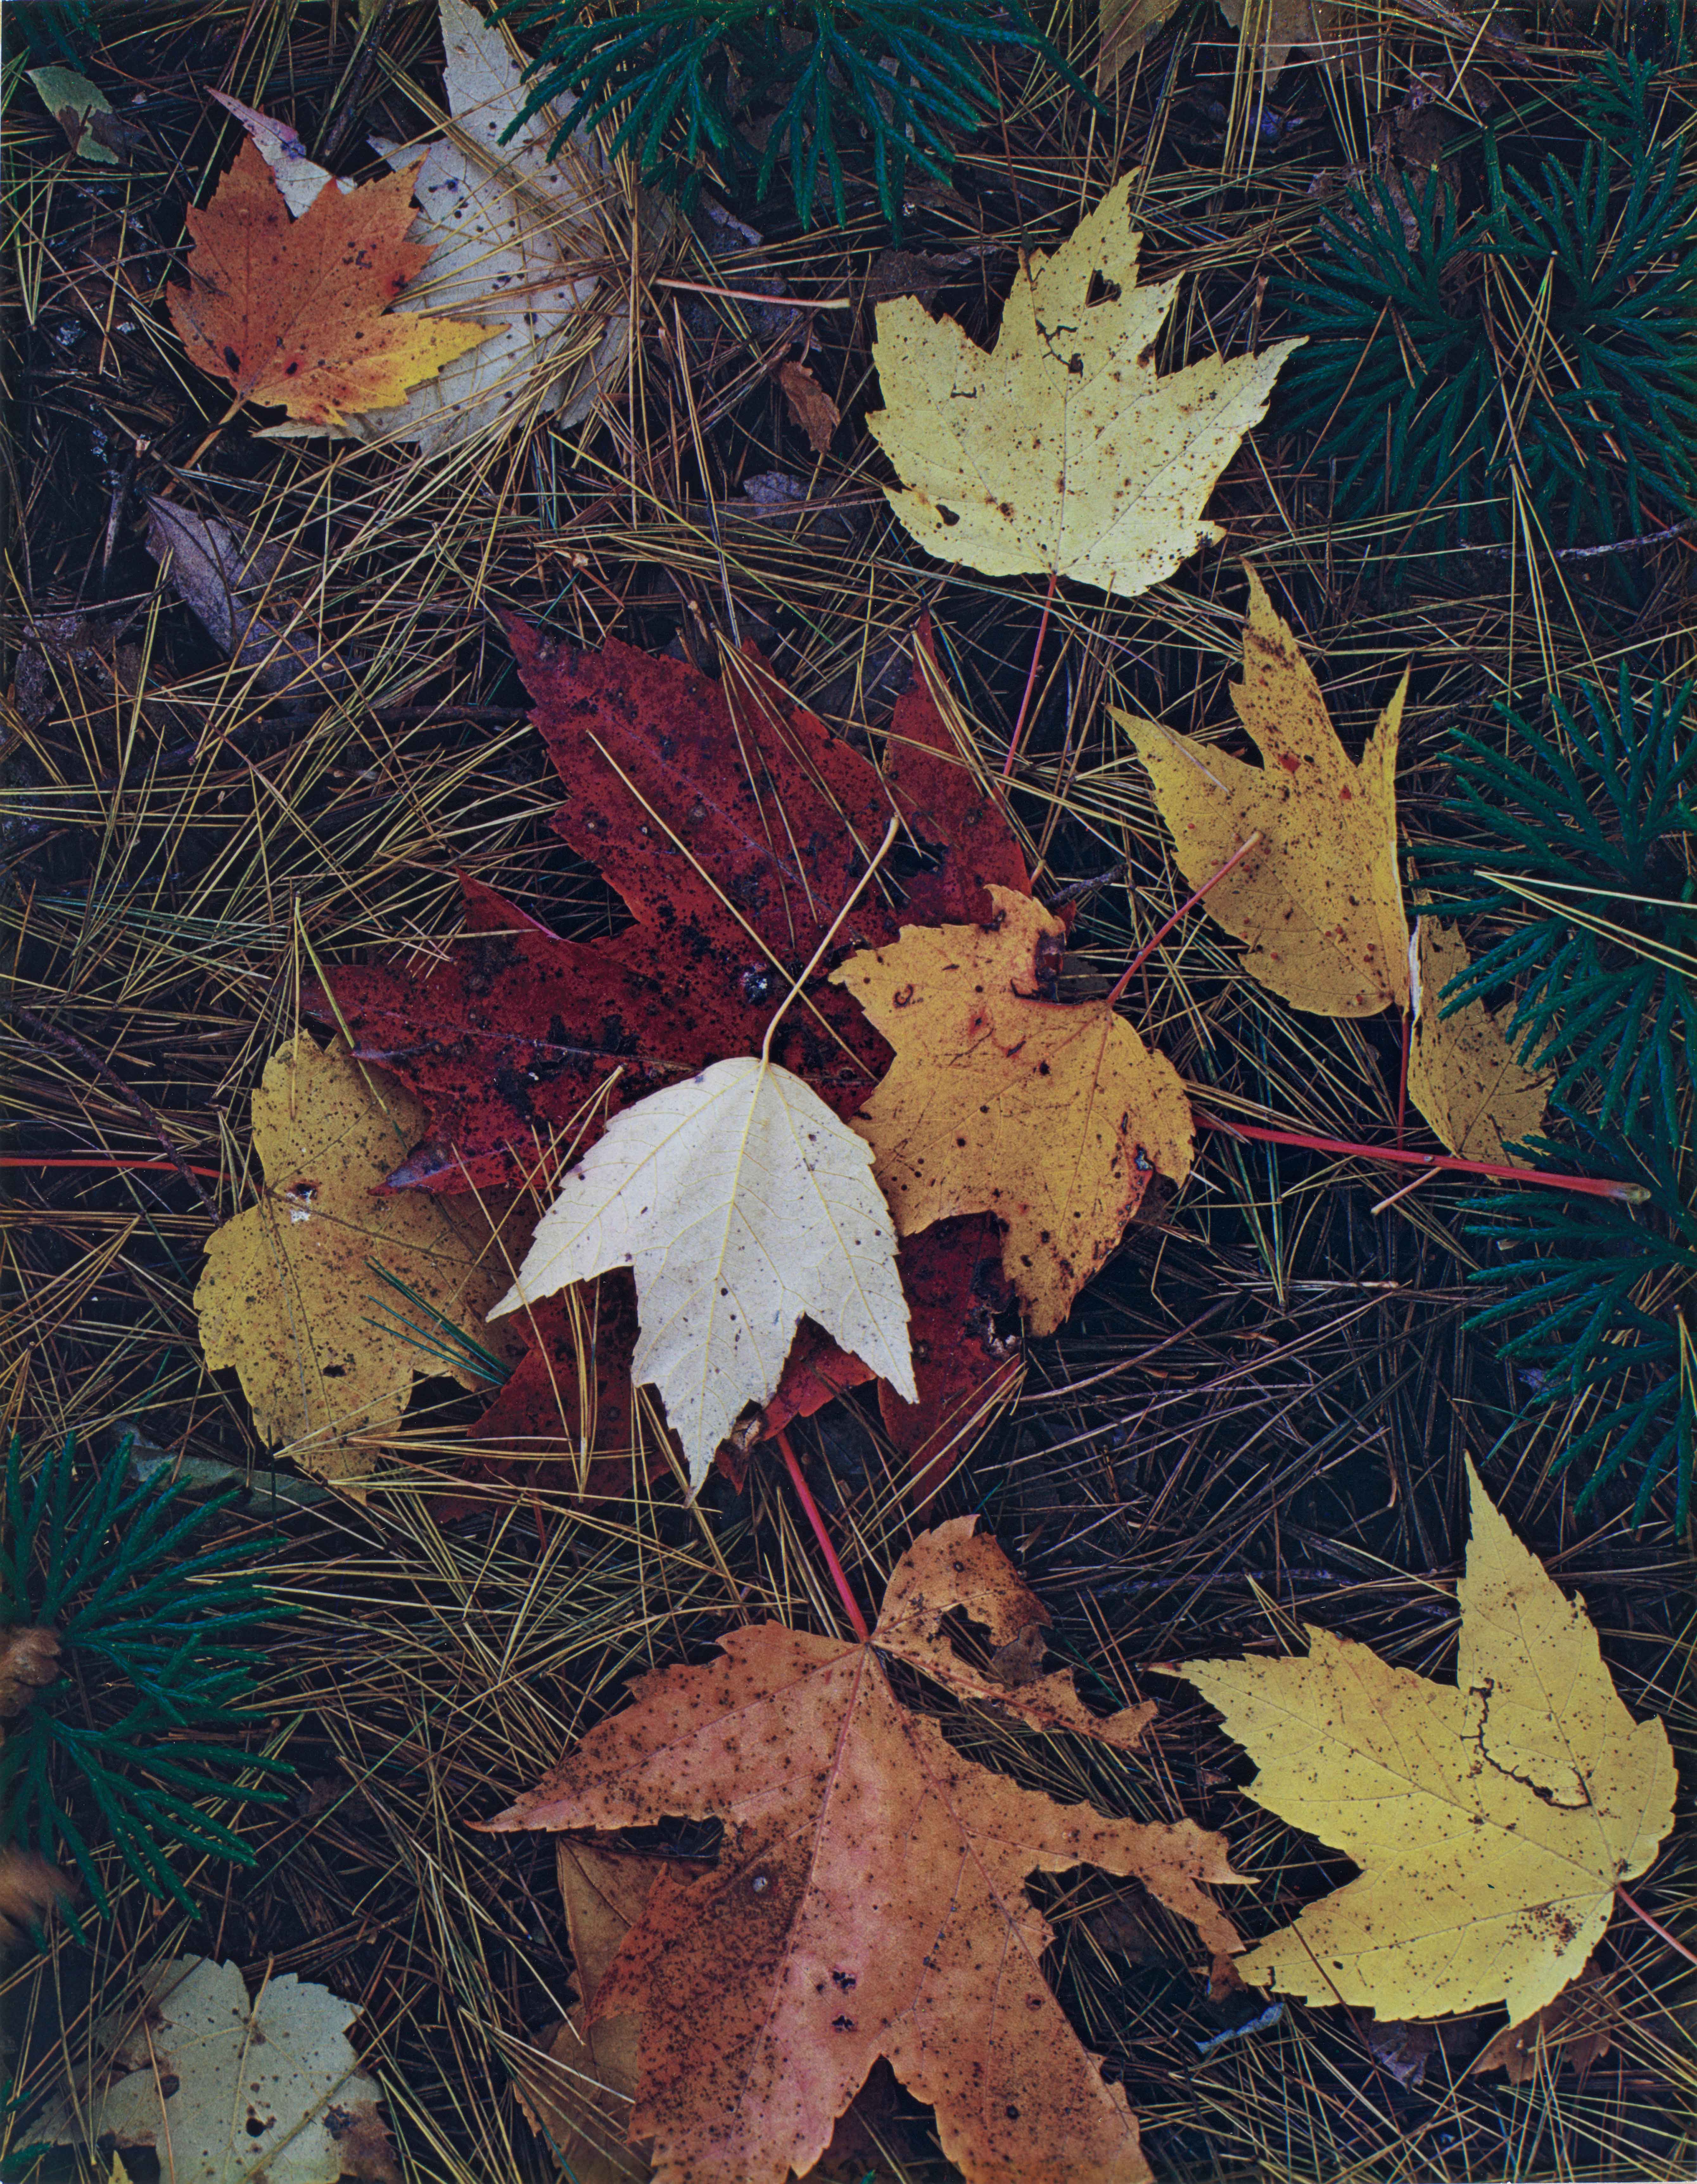 Eliot Porter (American, 1901–1990), Maple Leaves and Pine Needles, Tamworth, New Hampshire, about 1956, dye-transfer print. Bank of America Collection. © 1990 Amon Carter Museum of American Art